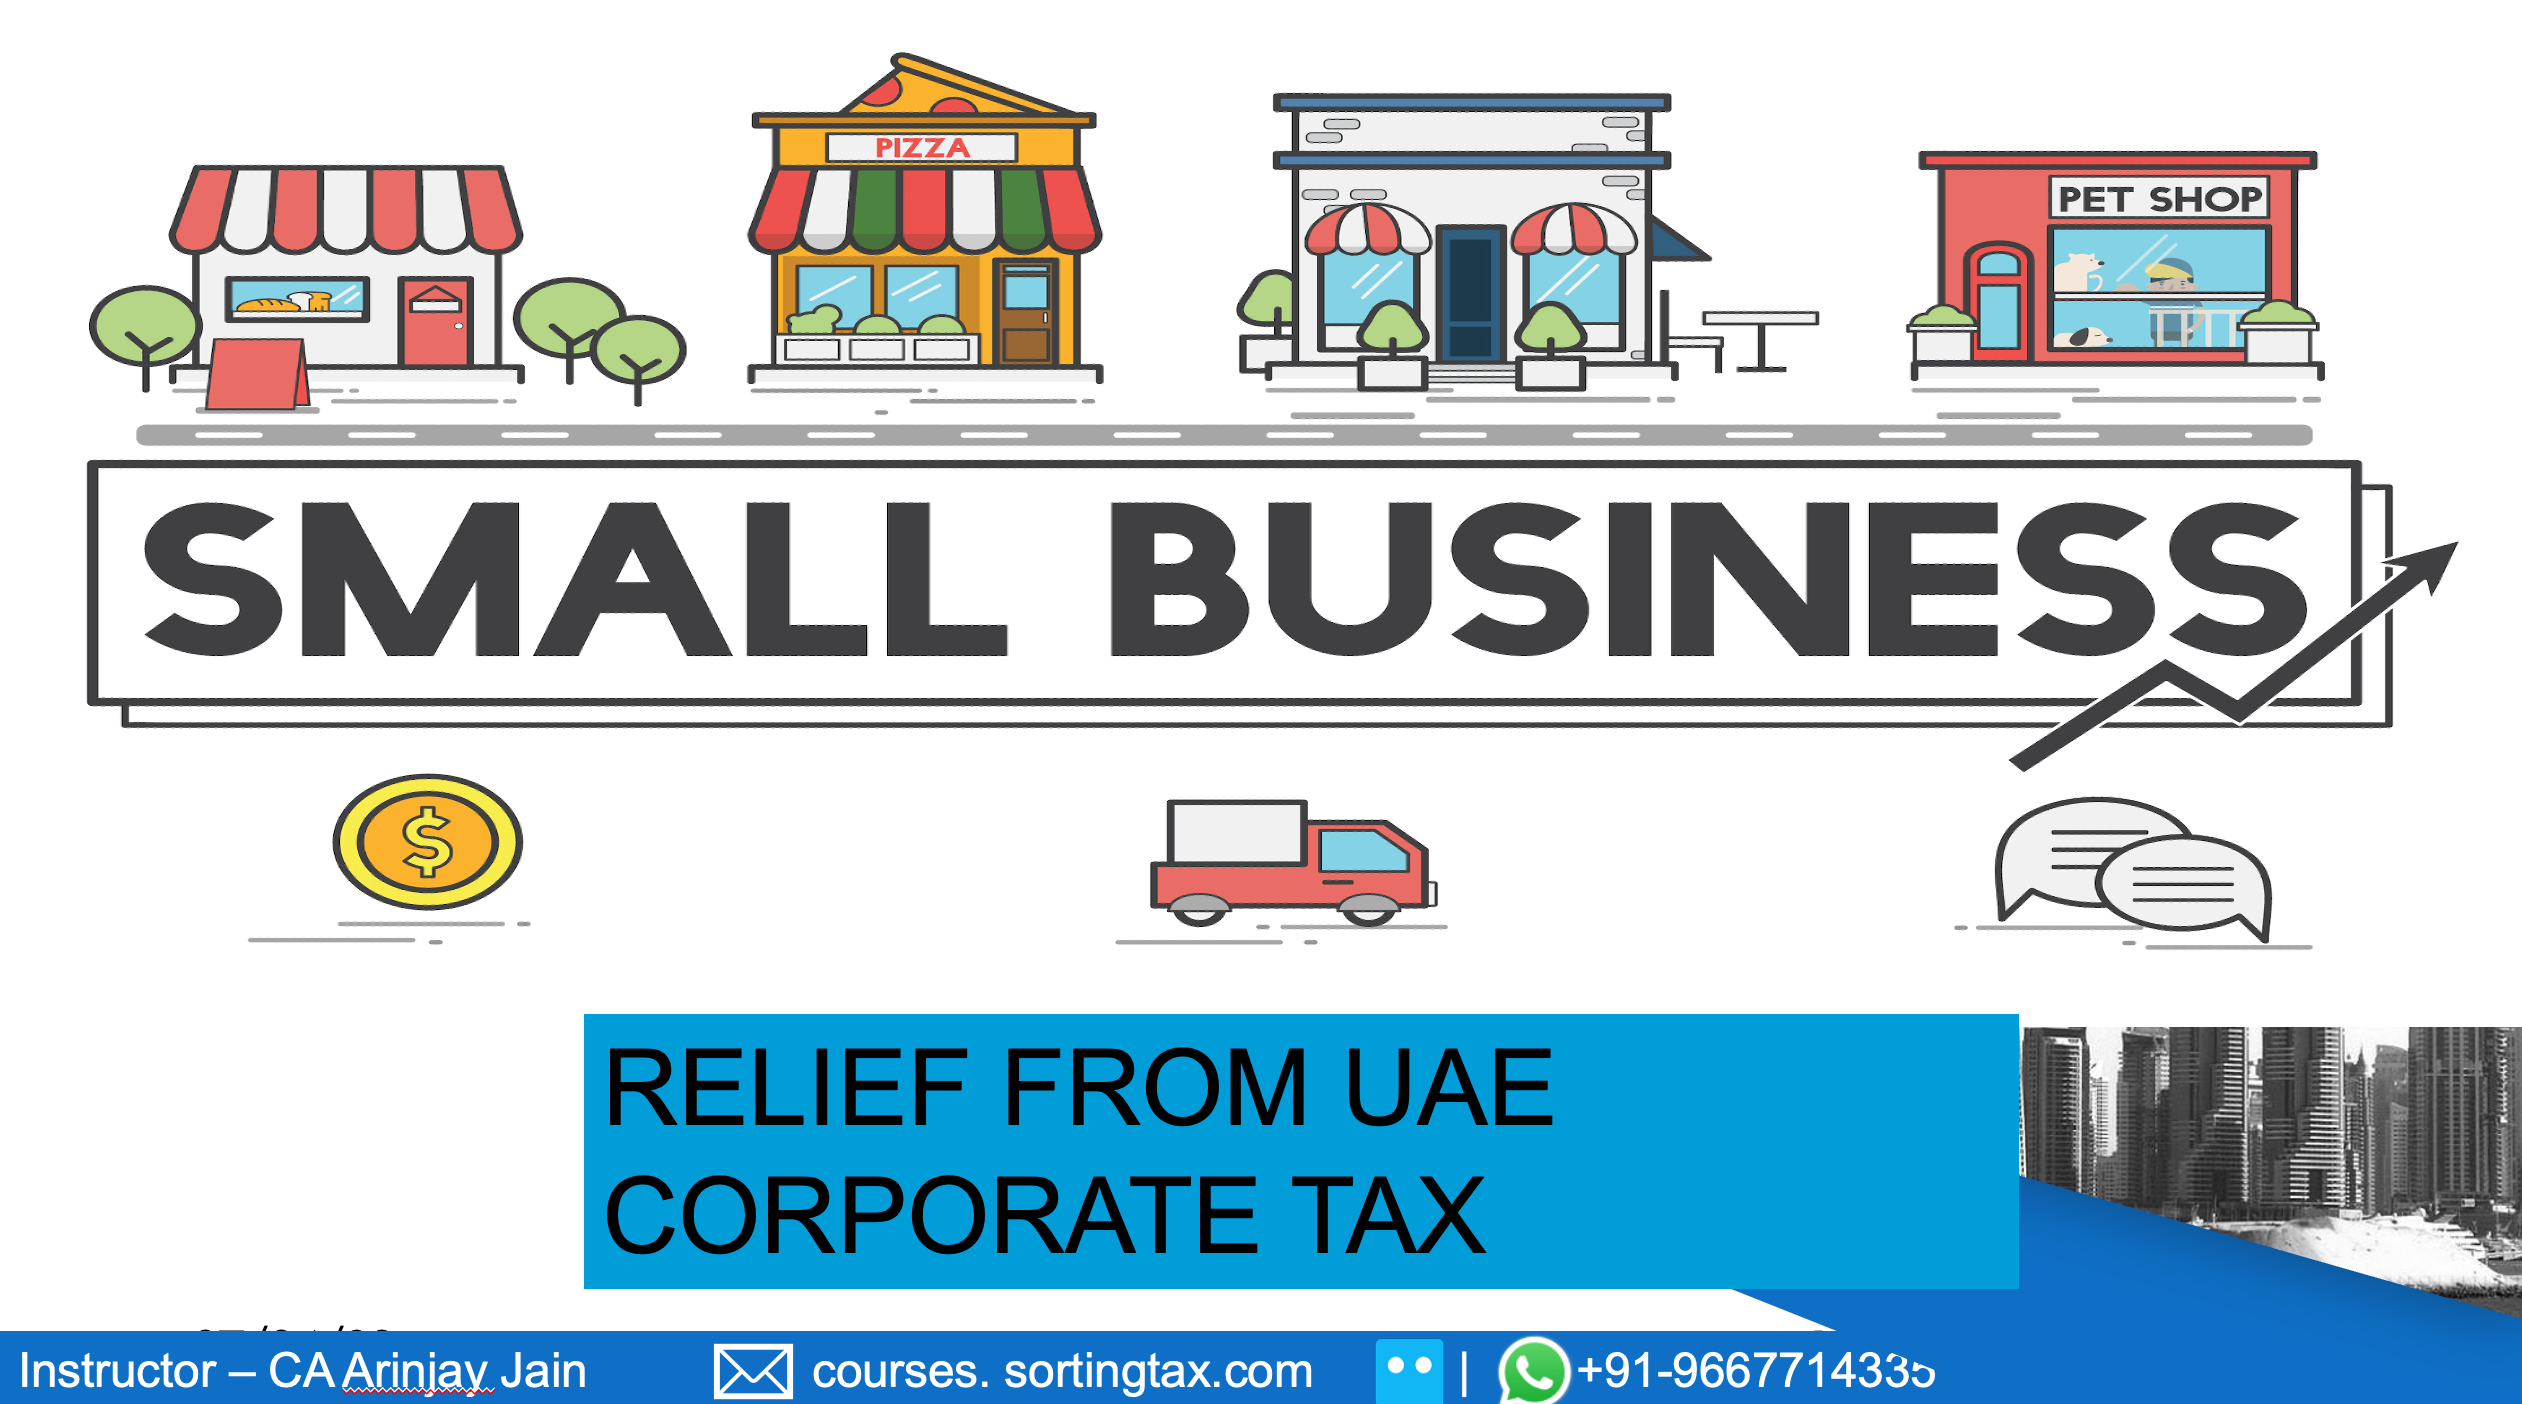 Small business Relief under UAE Corporate Tax